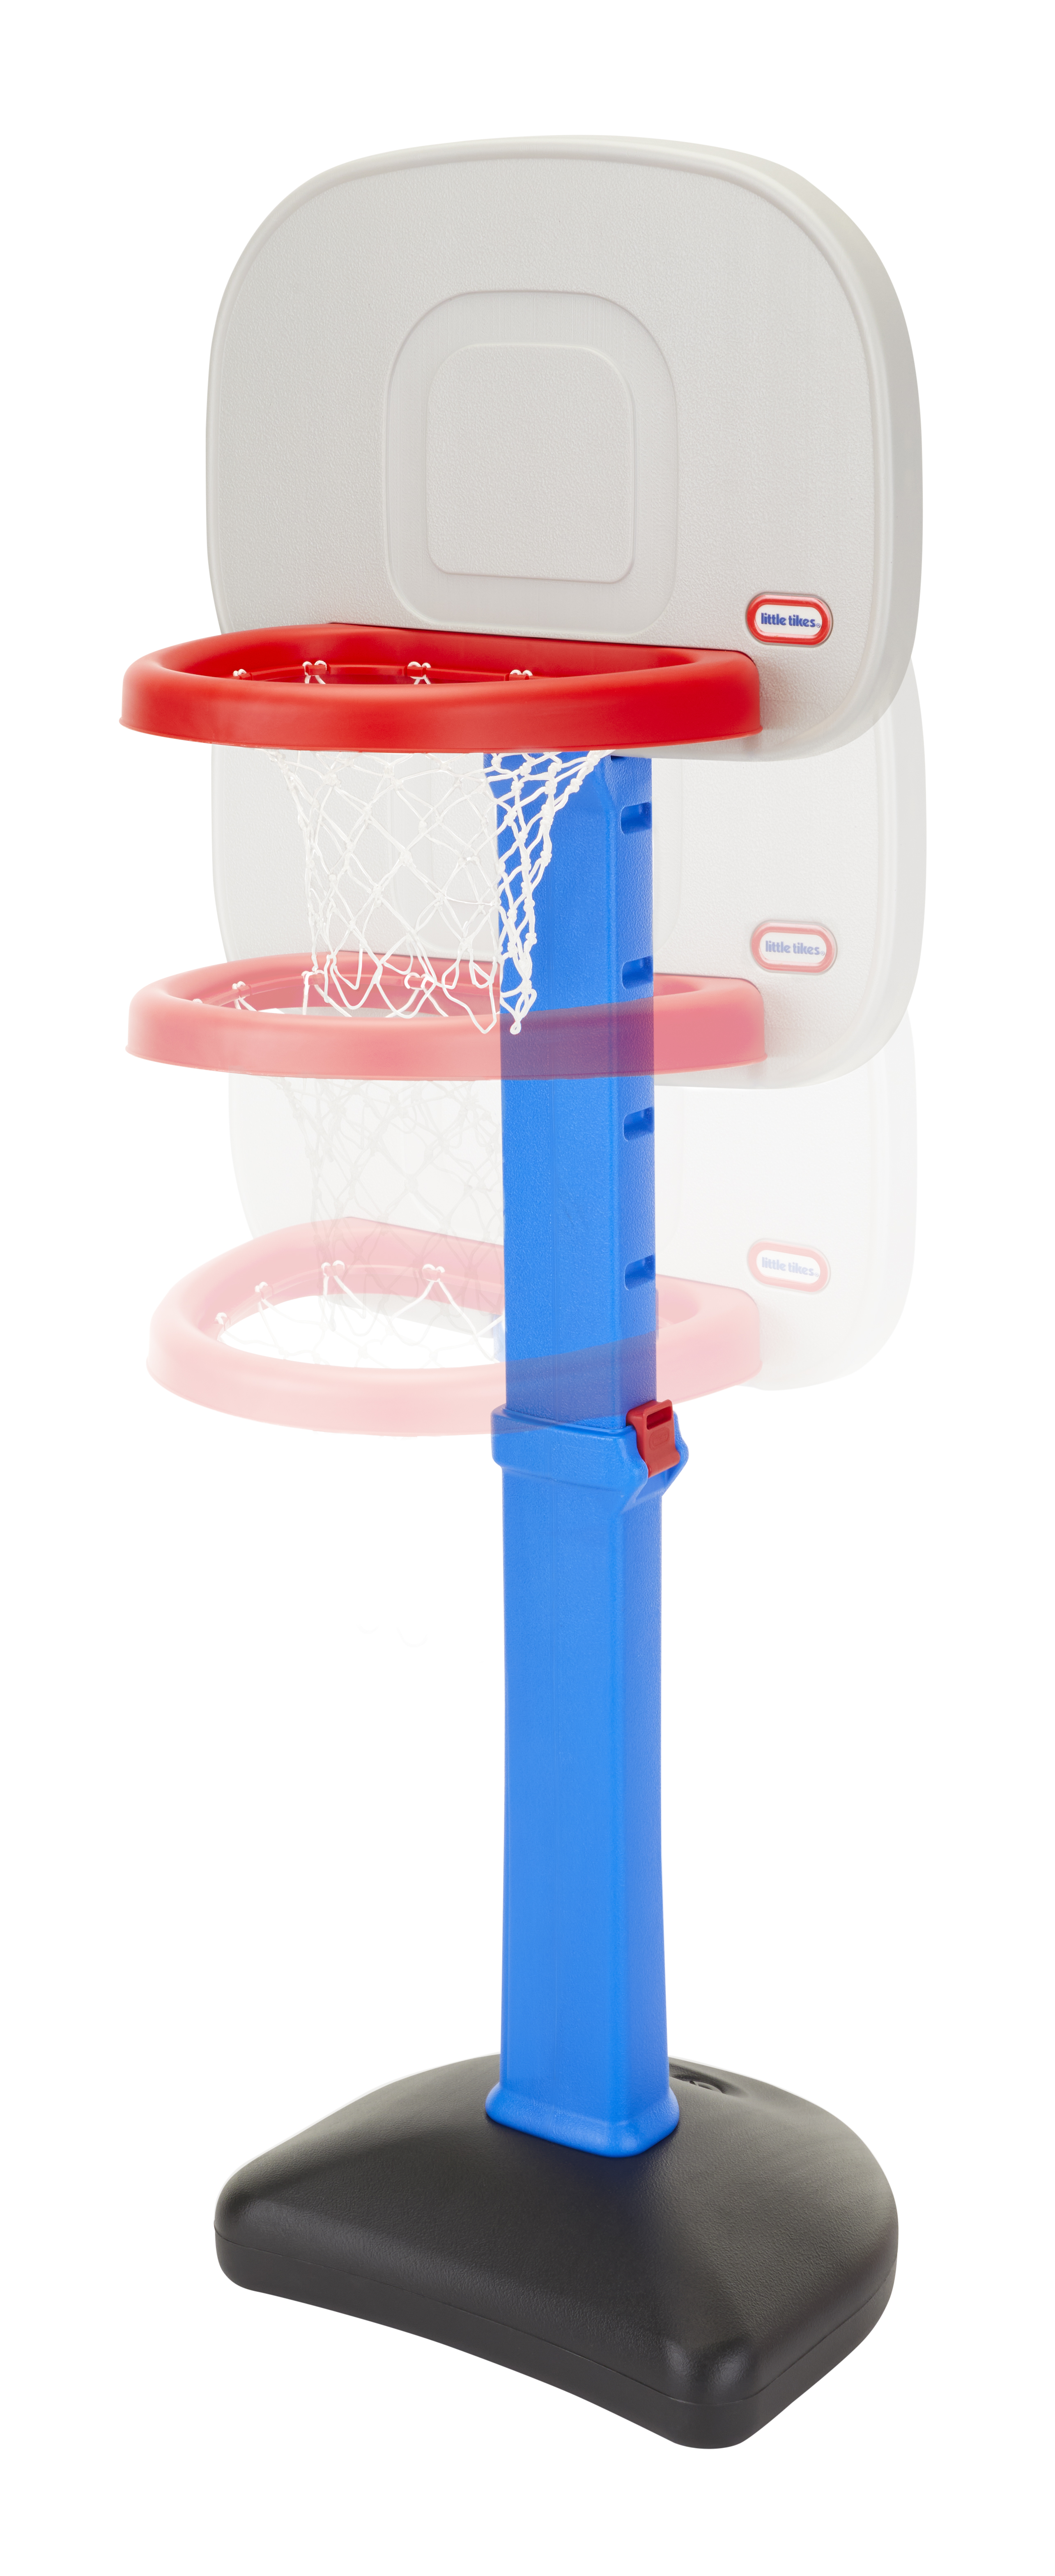 Little Tikes TotSports Easy Score Toy Basketball Hoop with Ball, Height Adjustable, Indoor Outdoor Backyard Toy Sports Play Set, Kids Girls Boys Ages 18 months to 5 Years, Blue - image 5 of 6